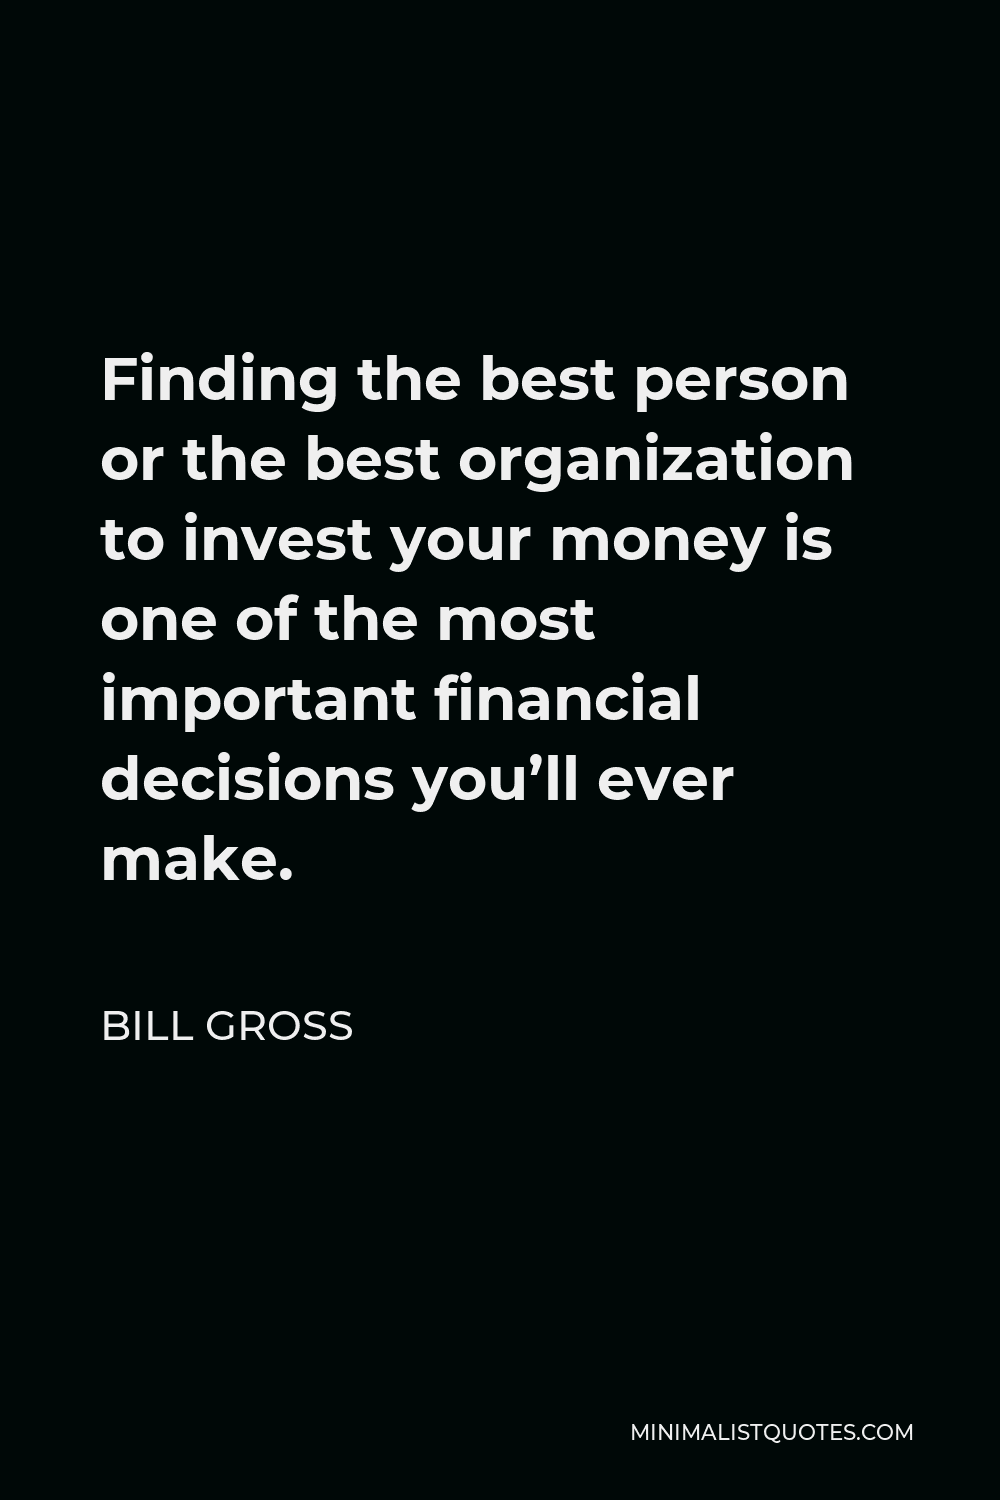 Bill Gross Quote - Finding the best person or the best organization to invest your money is one of the most important financial decisions you’ll ever make.